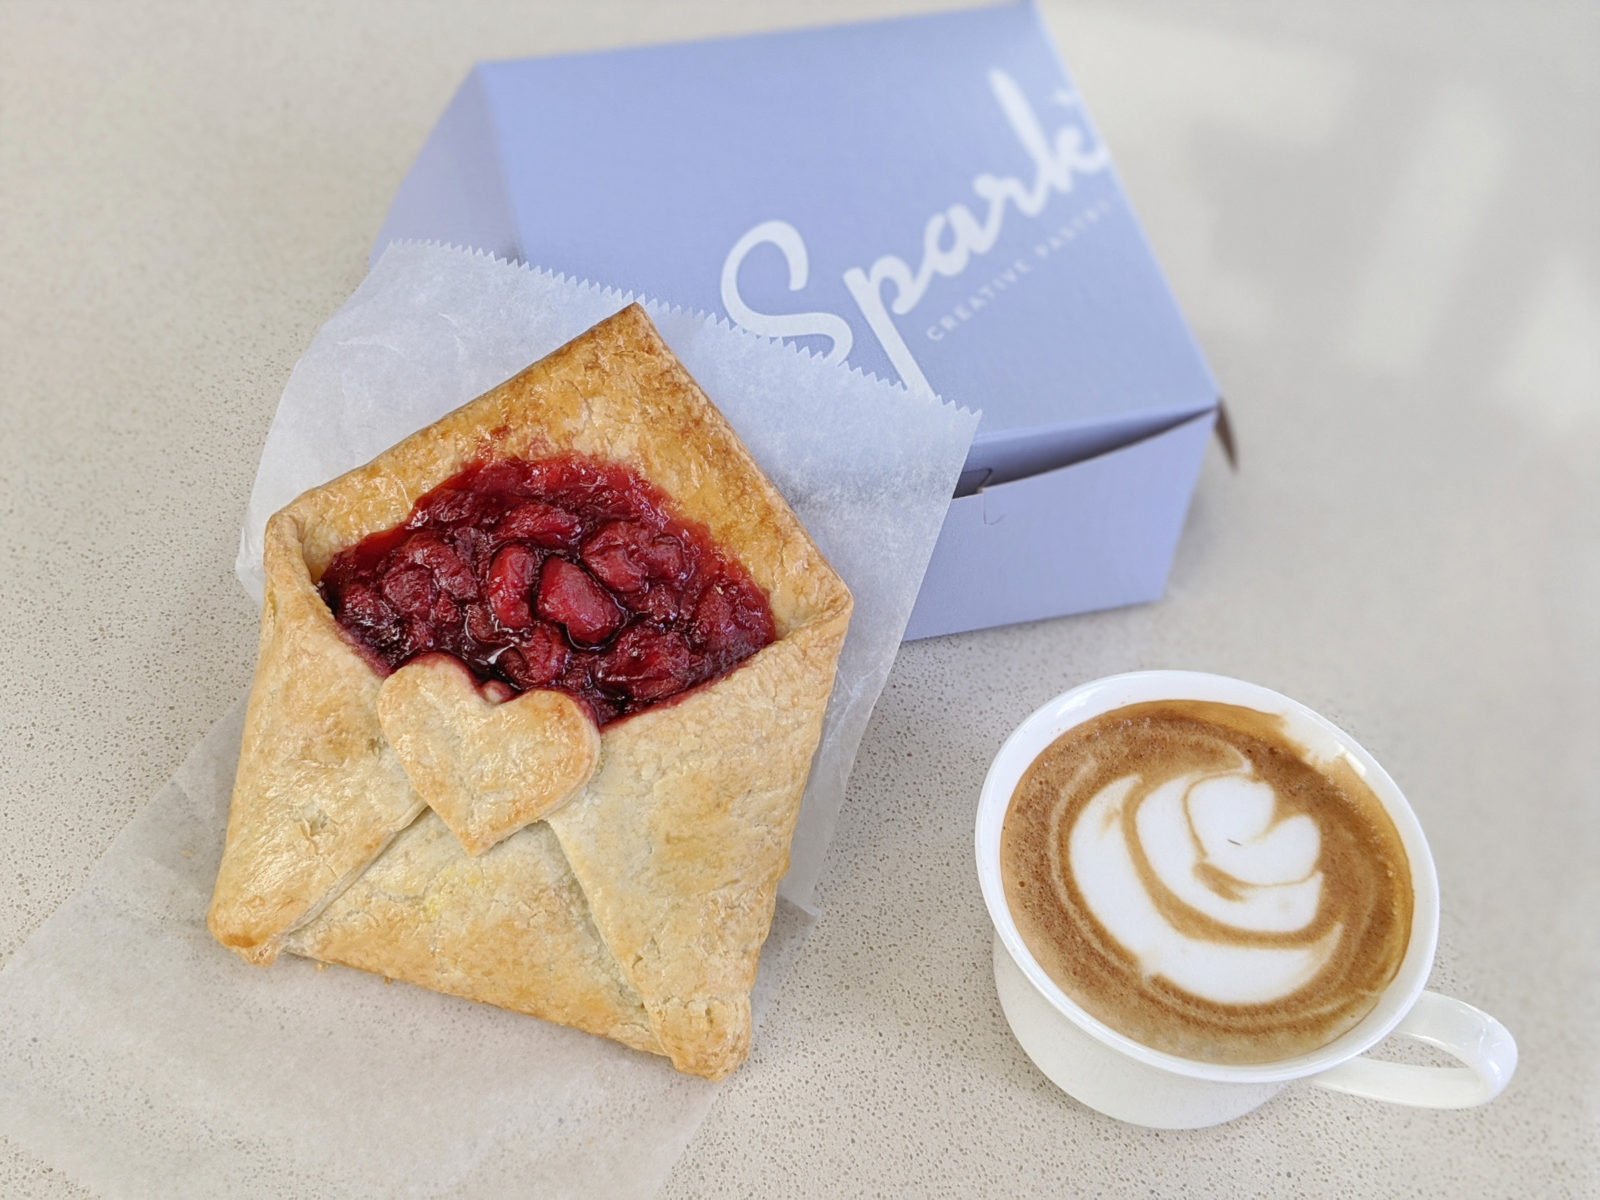 Cute valentine's day baked good and cup of coffee from Spark'd